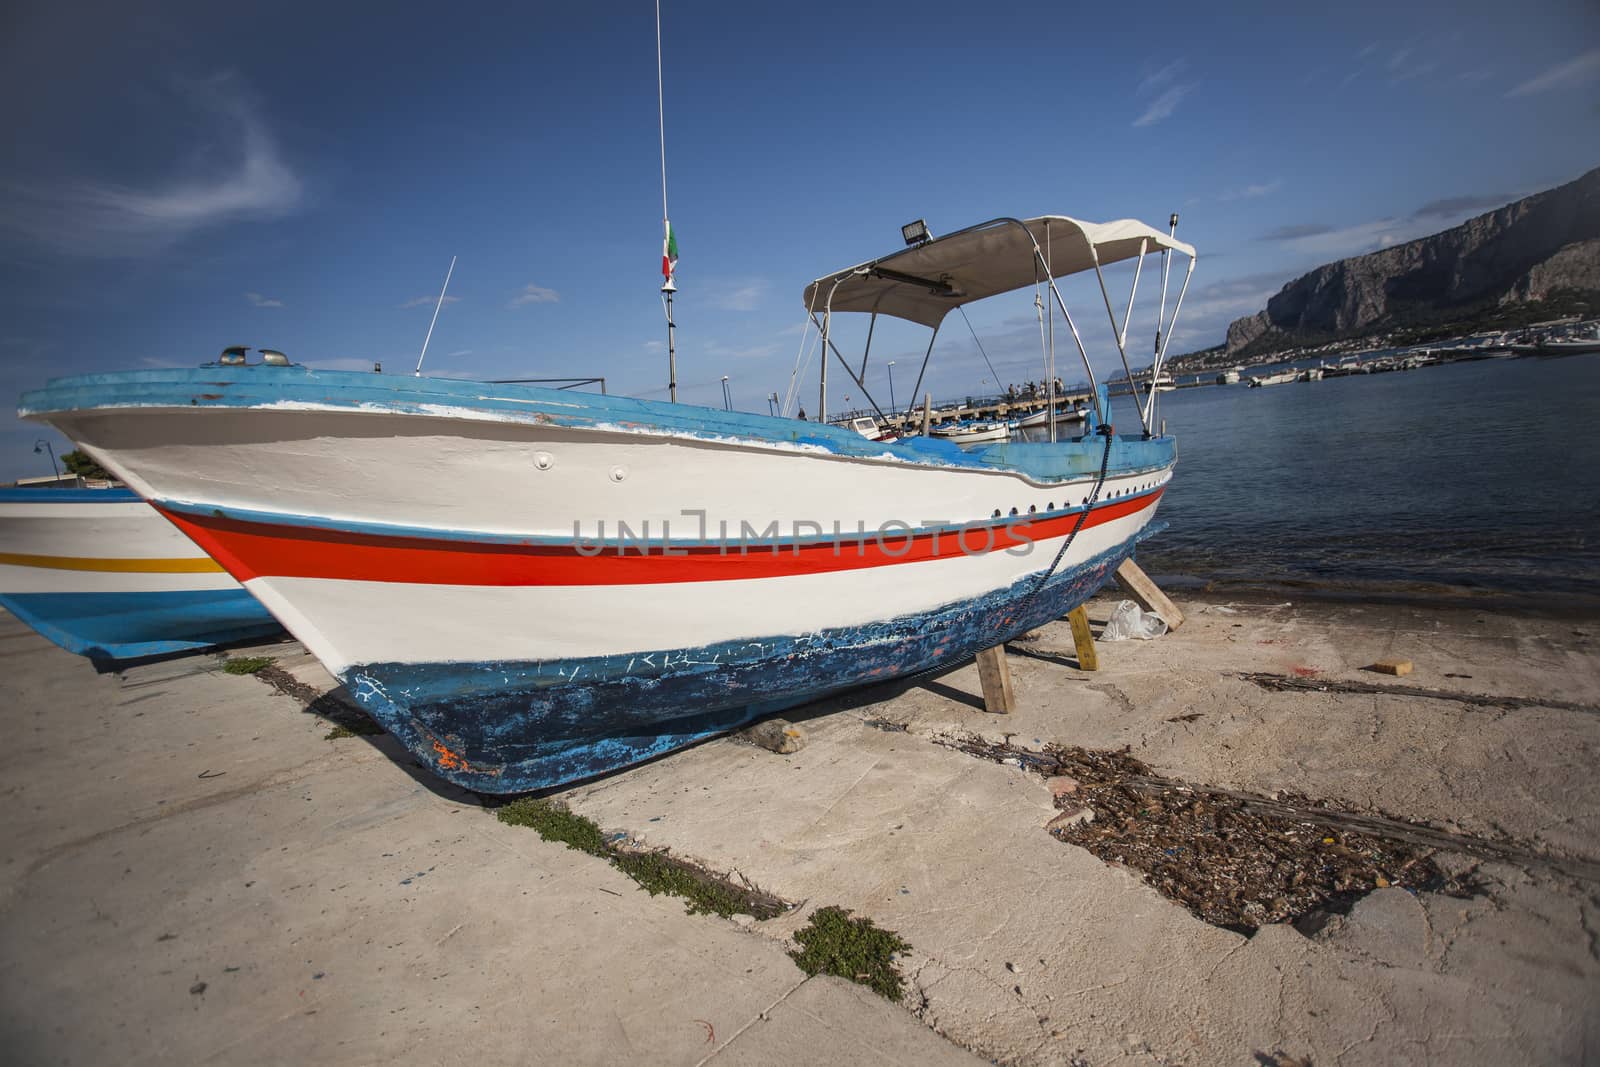 Boat stranded on the shore by pippocarlot